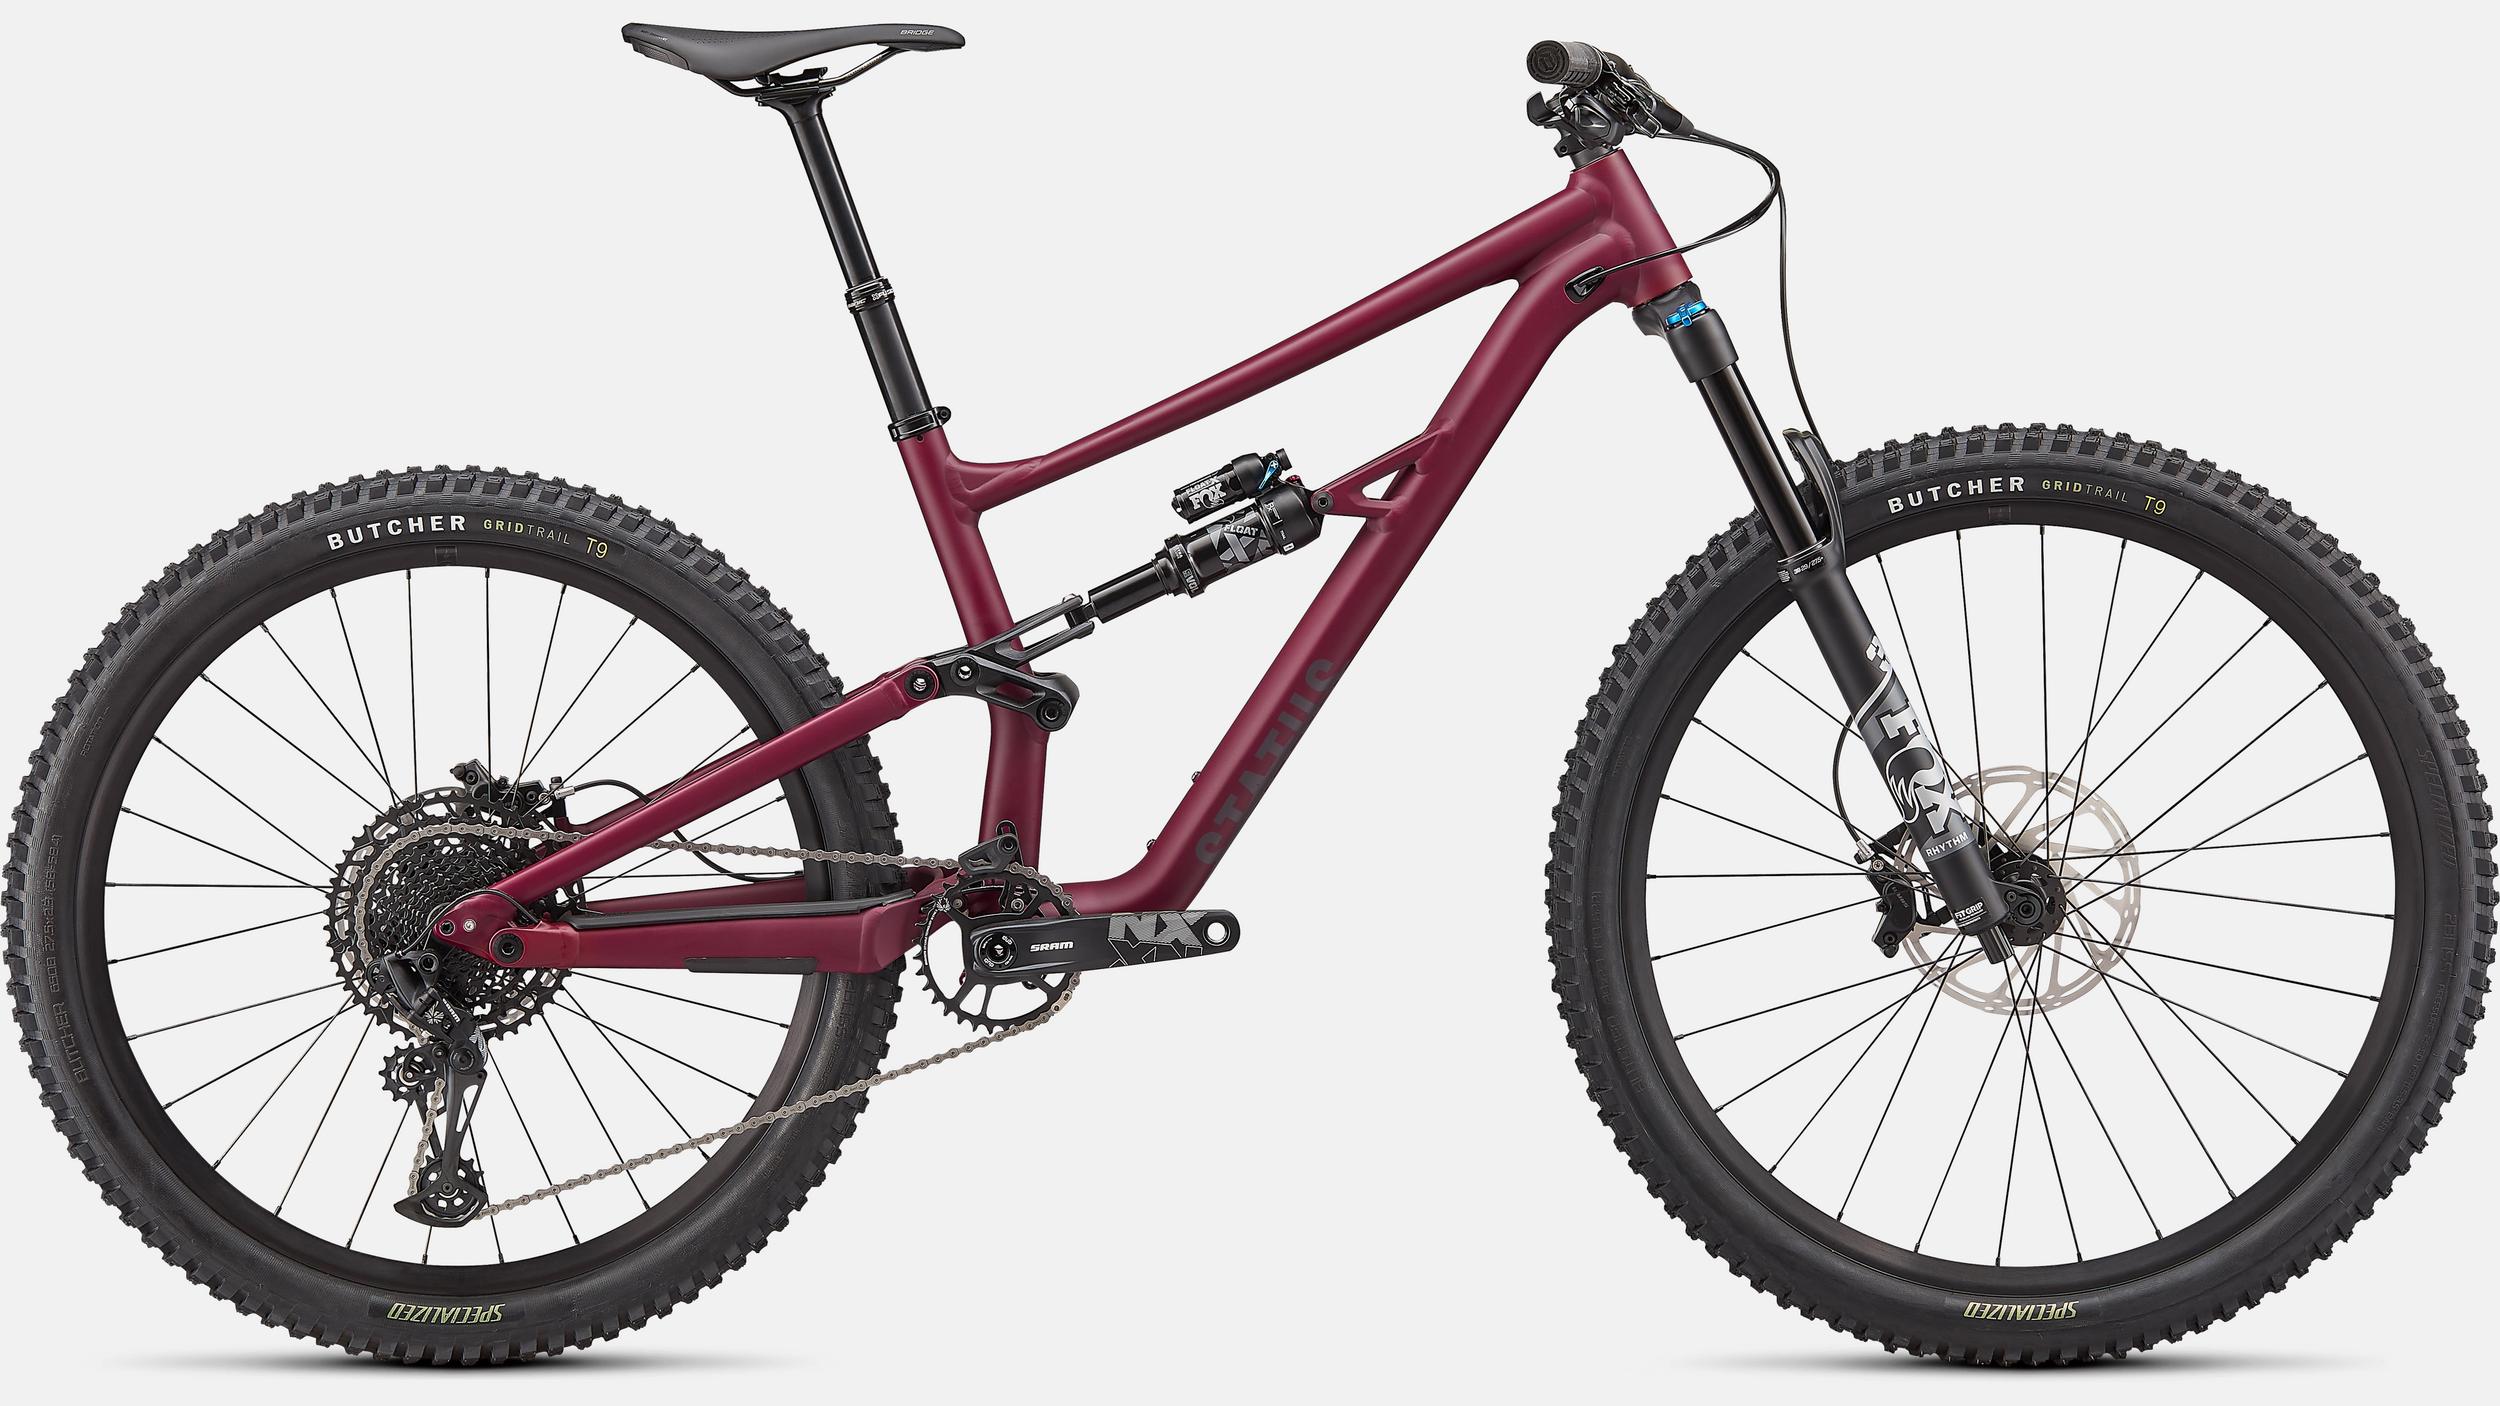 Paint for 2022 Specialized Status 140 - Satin Raspberry